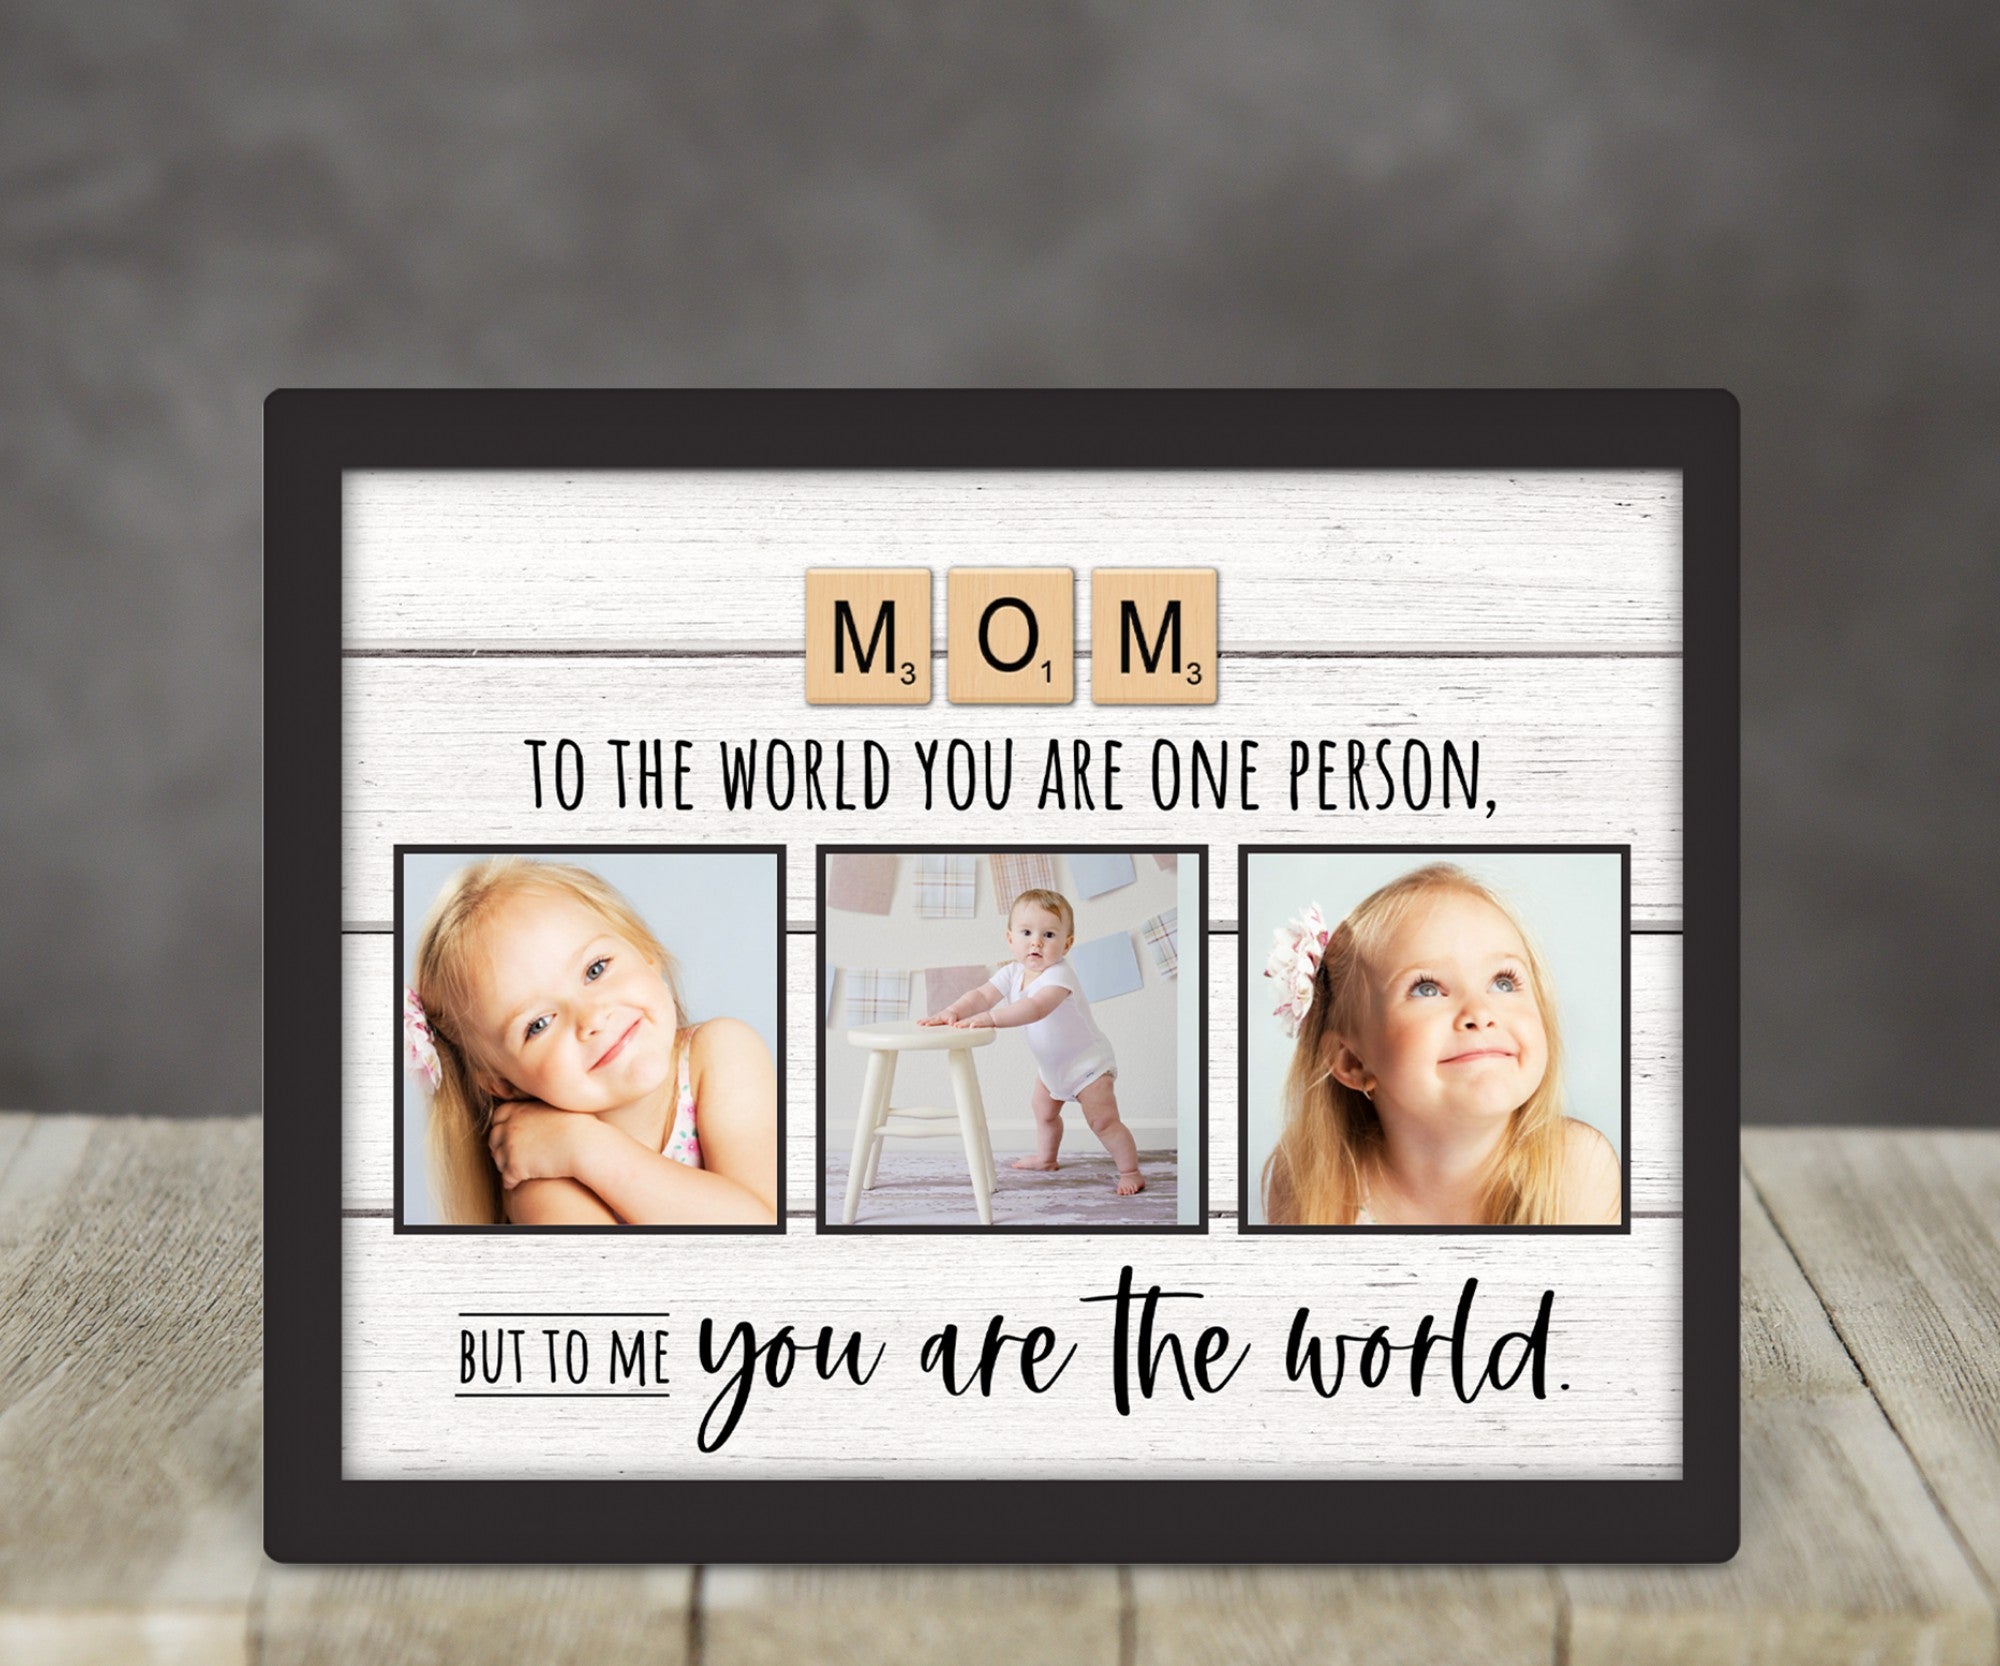 Birthday Gifts for Women,Mothers Day Gifts,Gifts for Mom, Mom